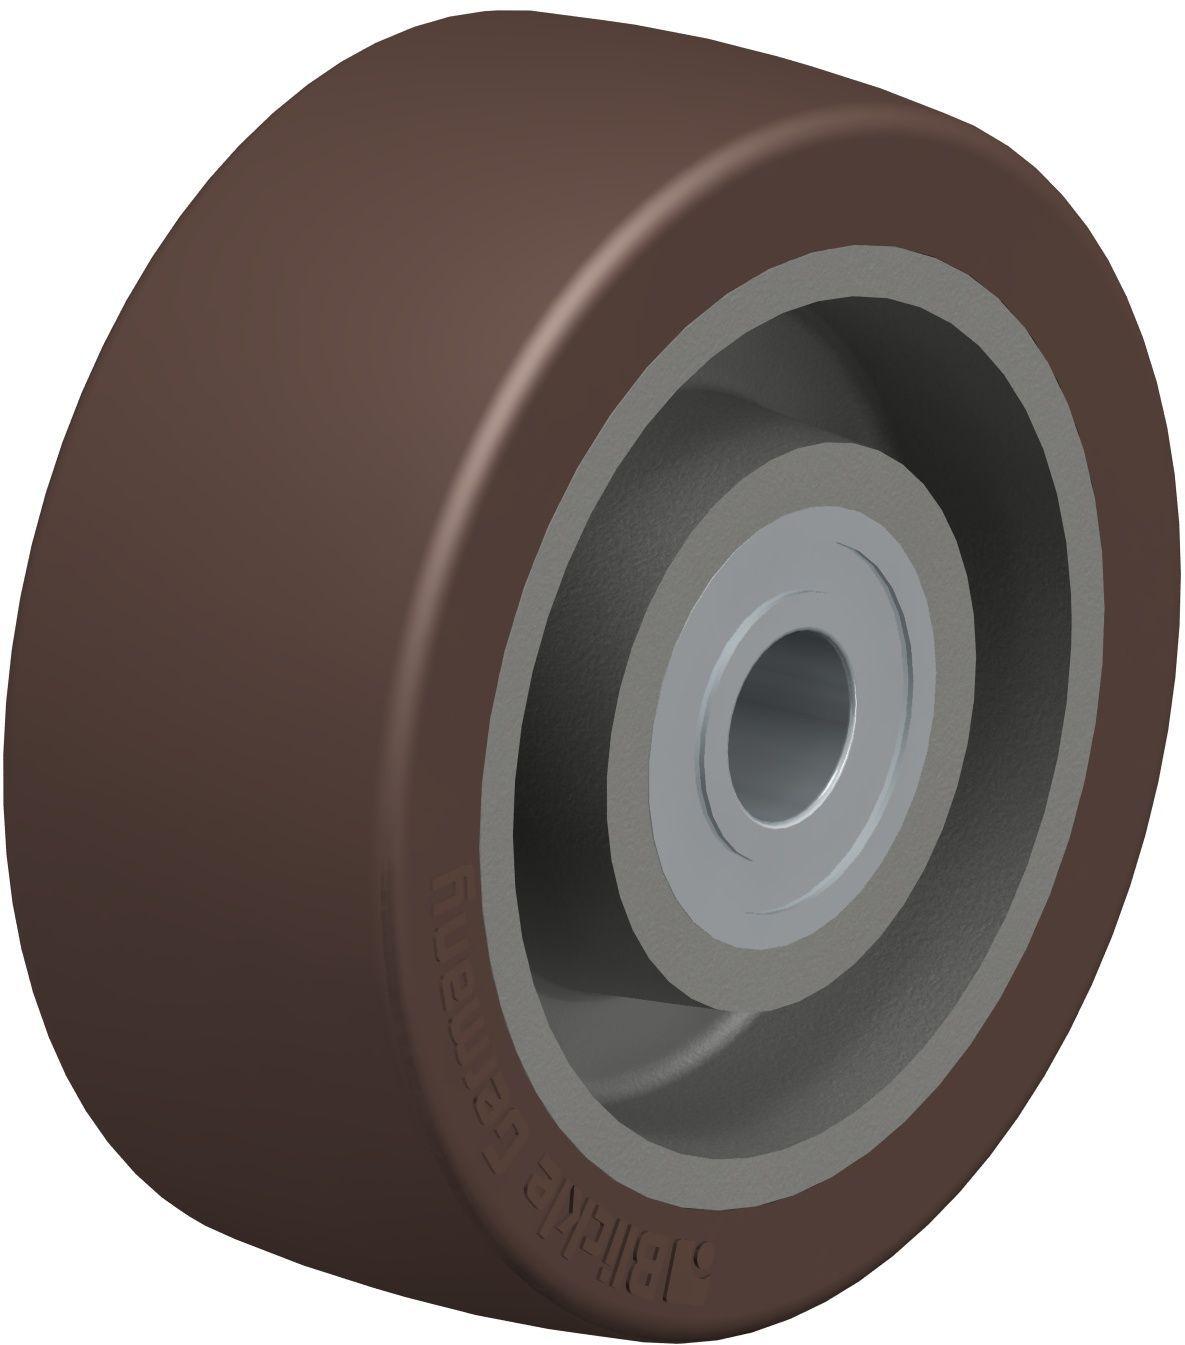 Wheel Ø	100 mm (D)
Wheel width	40 mm (T2)
Load capacity	400 kg
Axle bore Ø	15 mm (d)
Clamping length	40 mm (T5)
Hub length	40 mm (T1)
unit weight	1 kg
Temperature resistance to	-25 ° C
Temperature resistance to	70 ° C
tread and tire hardness	92° Shore A
Bearing type	Ball bearing